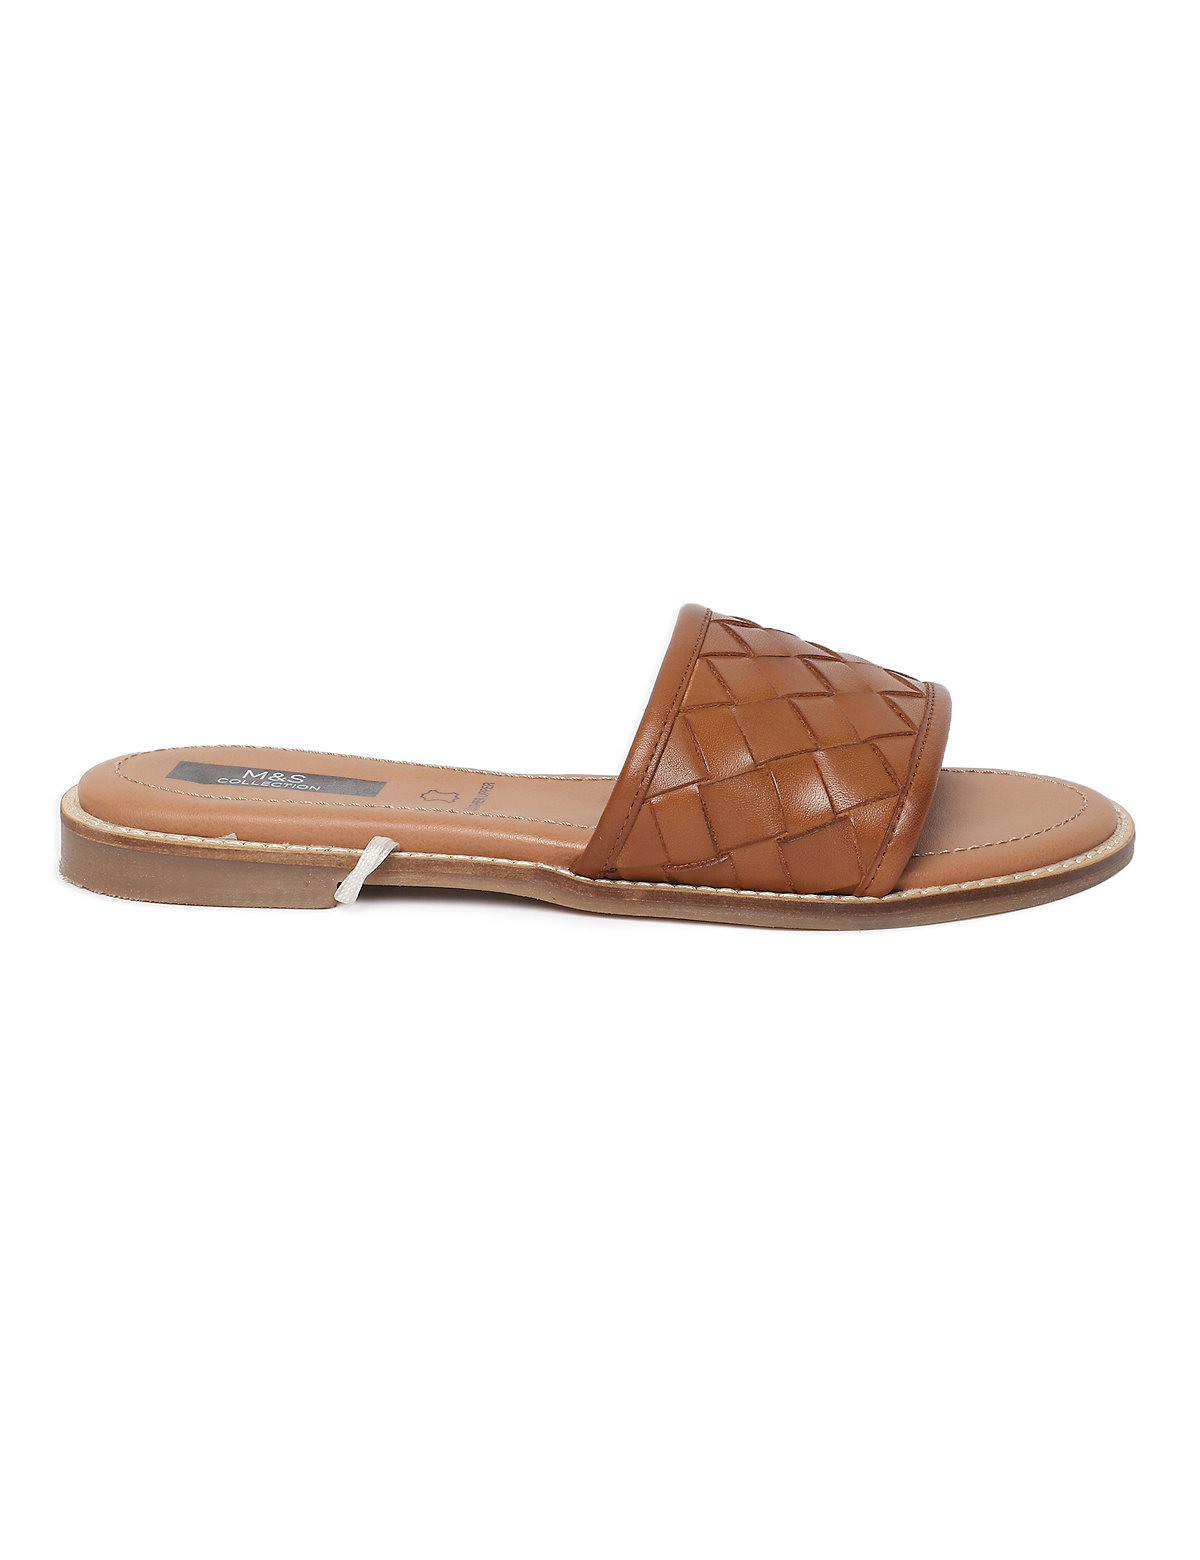 Pure Leather Basket Weave Sandals